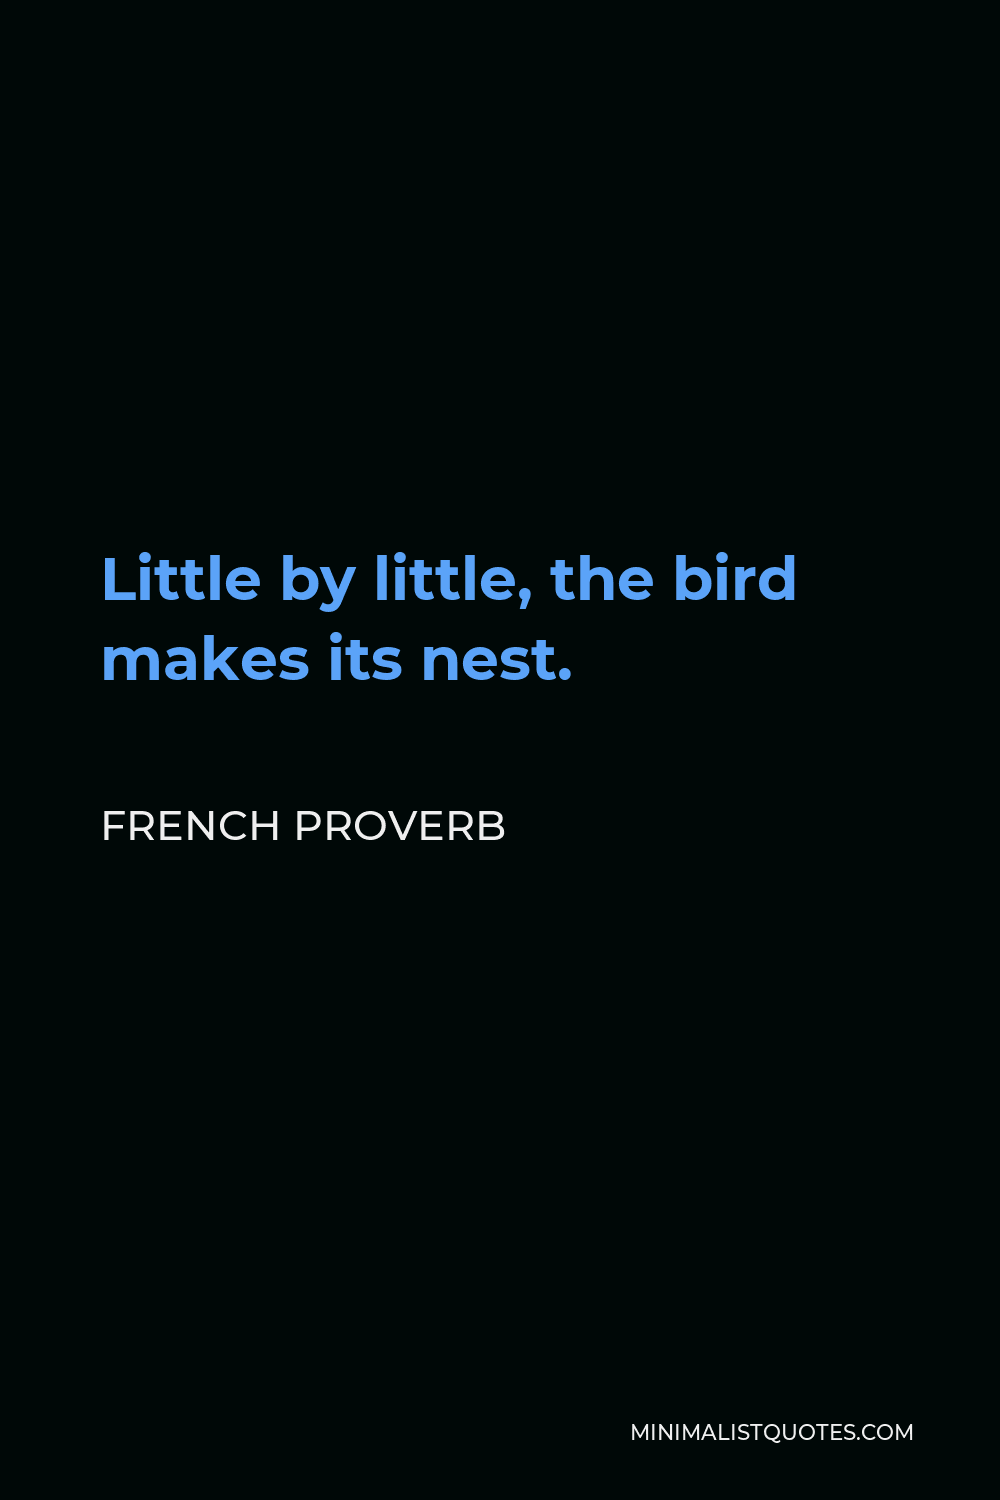 French Proverb Quote - Little by little, the bird makes its nest.